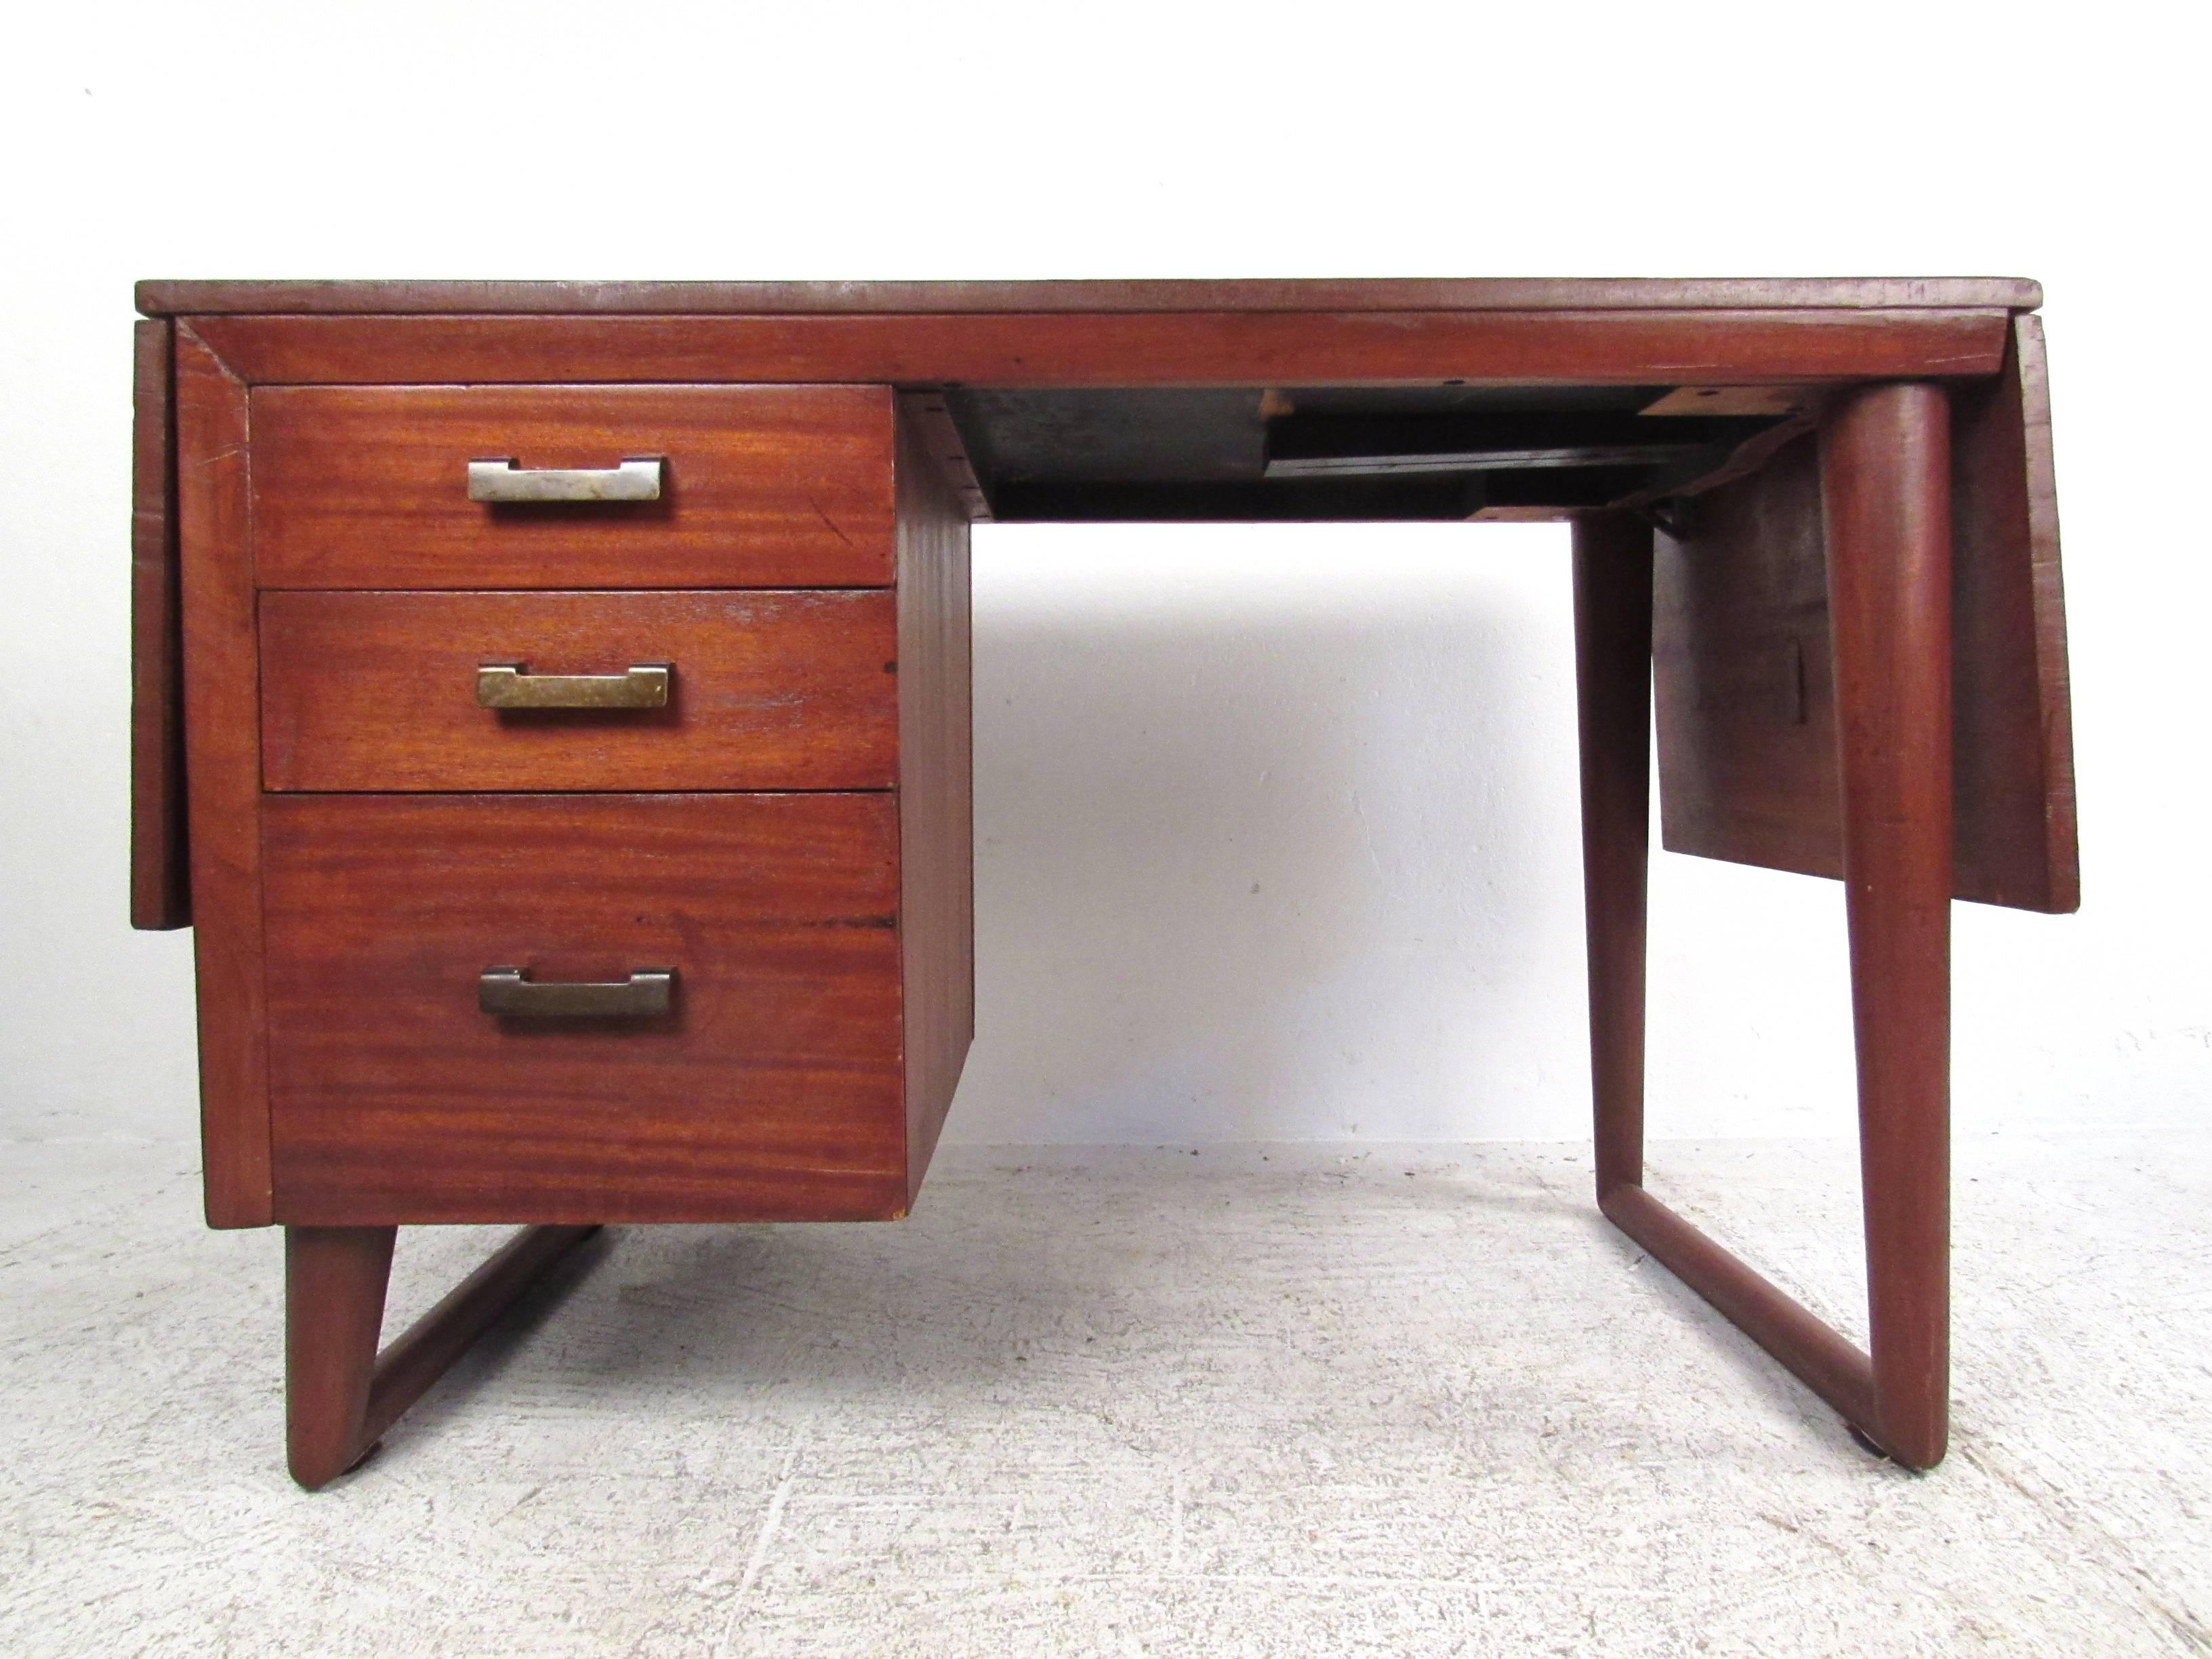 This unusual drop-leaf writing desk features sculptural sled legs, wide brass finish handles, and a Dual drop leaf design that expands the 44 inch workspace out to 72 inches. Three drawers for storage make this a versatile desk for a variety of